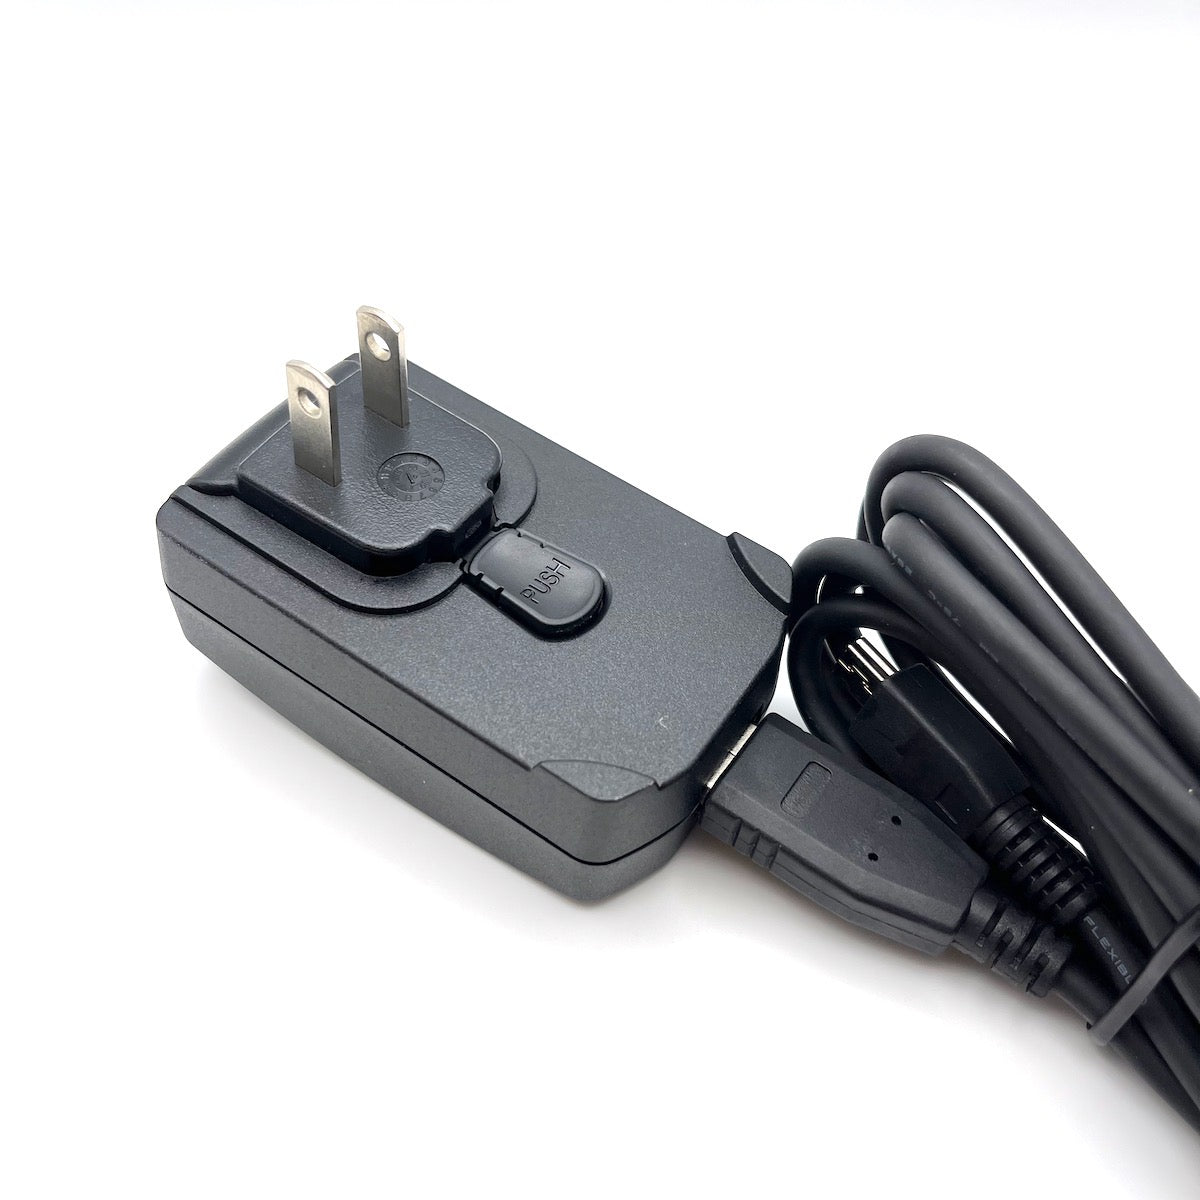 Adapter KIT AC 220V DC 12V for Garmin T5 KIT with cable and clip New